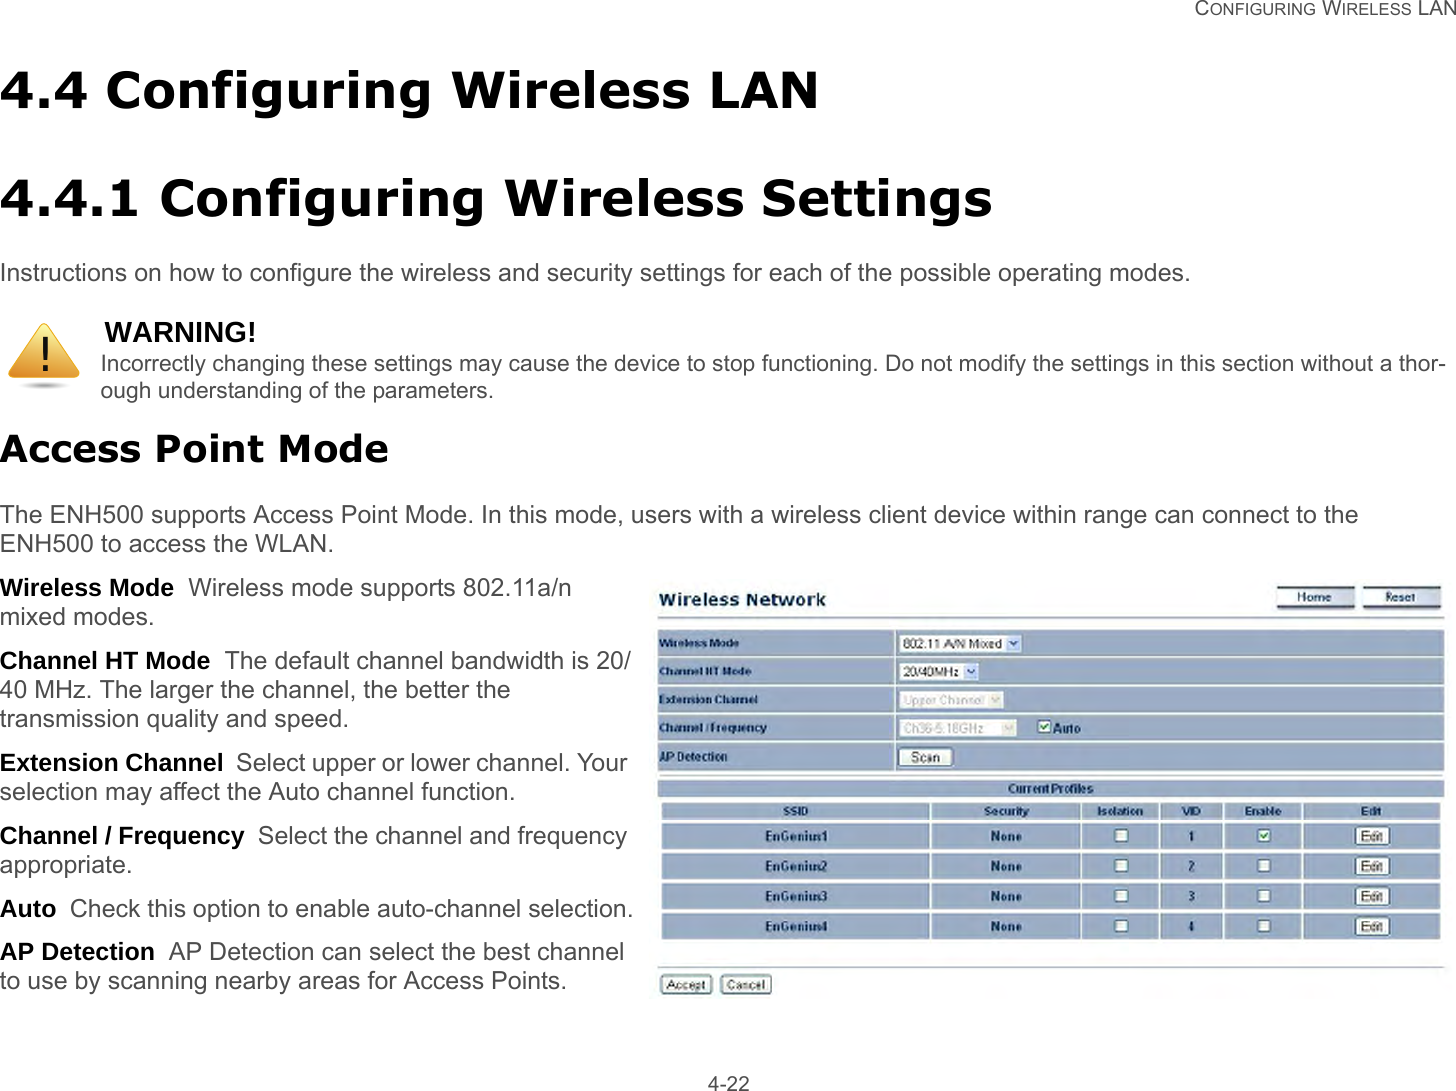   CONFIGURING WIRELESS LAN 4-224.4 Configuring Wireless LAN4.4.1 Configuring Wireless SettingsInstructions on how to configure the wireless and security settings for each of the possible operating modes.Access Point ModeThe ENH500 supports Access Point Mode. In this mode, users with a wireless client device within range can connect to the ENH500 to access the WLAN.Wireless Mode  Wireless mode supports 802.11a/n mixed modes.Channel HT Mode  The default channel bandwidth is 20/40 MHz. The larger the channel, the better the transmission quality and speed.Extension Channel  Select upper or lower channel. Your selection may affect the Auto channel function.Channel / Frequency  Select the channel and frequency appropriate.Auto  Check this option to enable auto-channel selection.AP Detection  AP Detection can select the best channel to use by scanning nearby areas for Access Points.WARNING!Incorrectly changing these settings may cause the device to stop functioning. Do not modify the settings in this section without a thor-ough understanding of the parameters.!